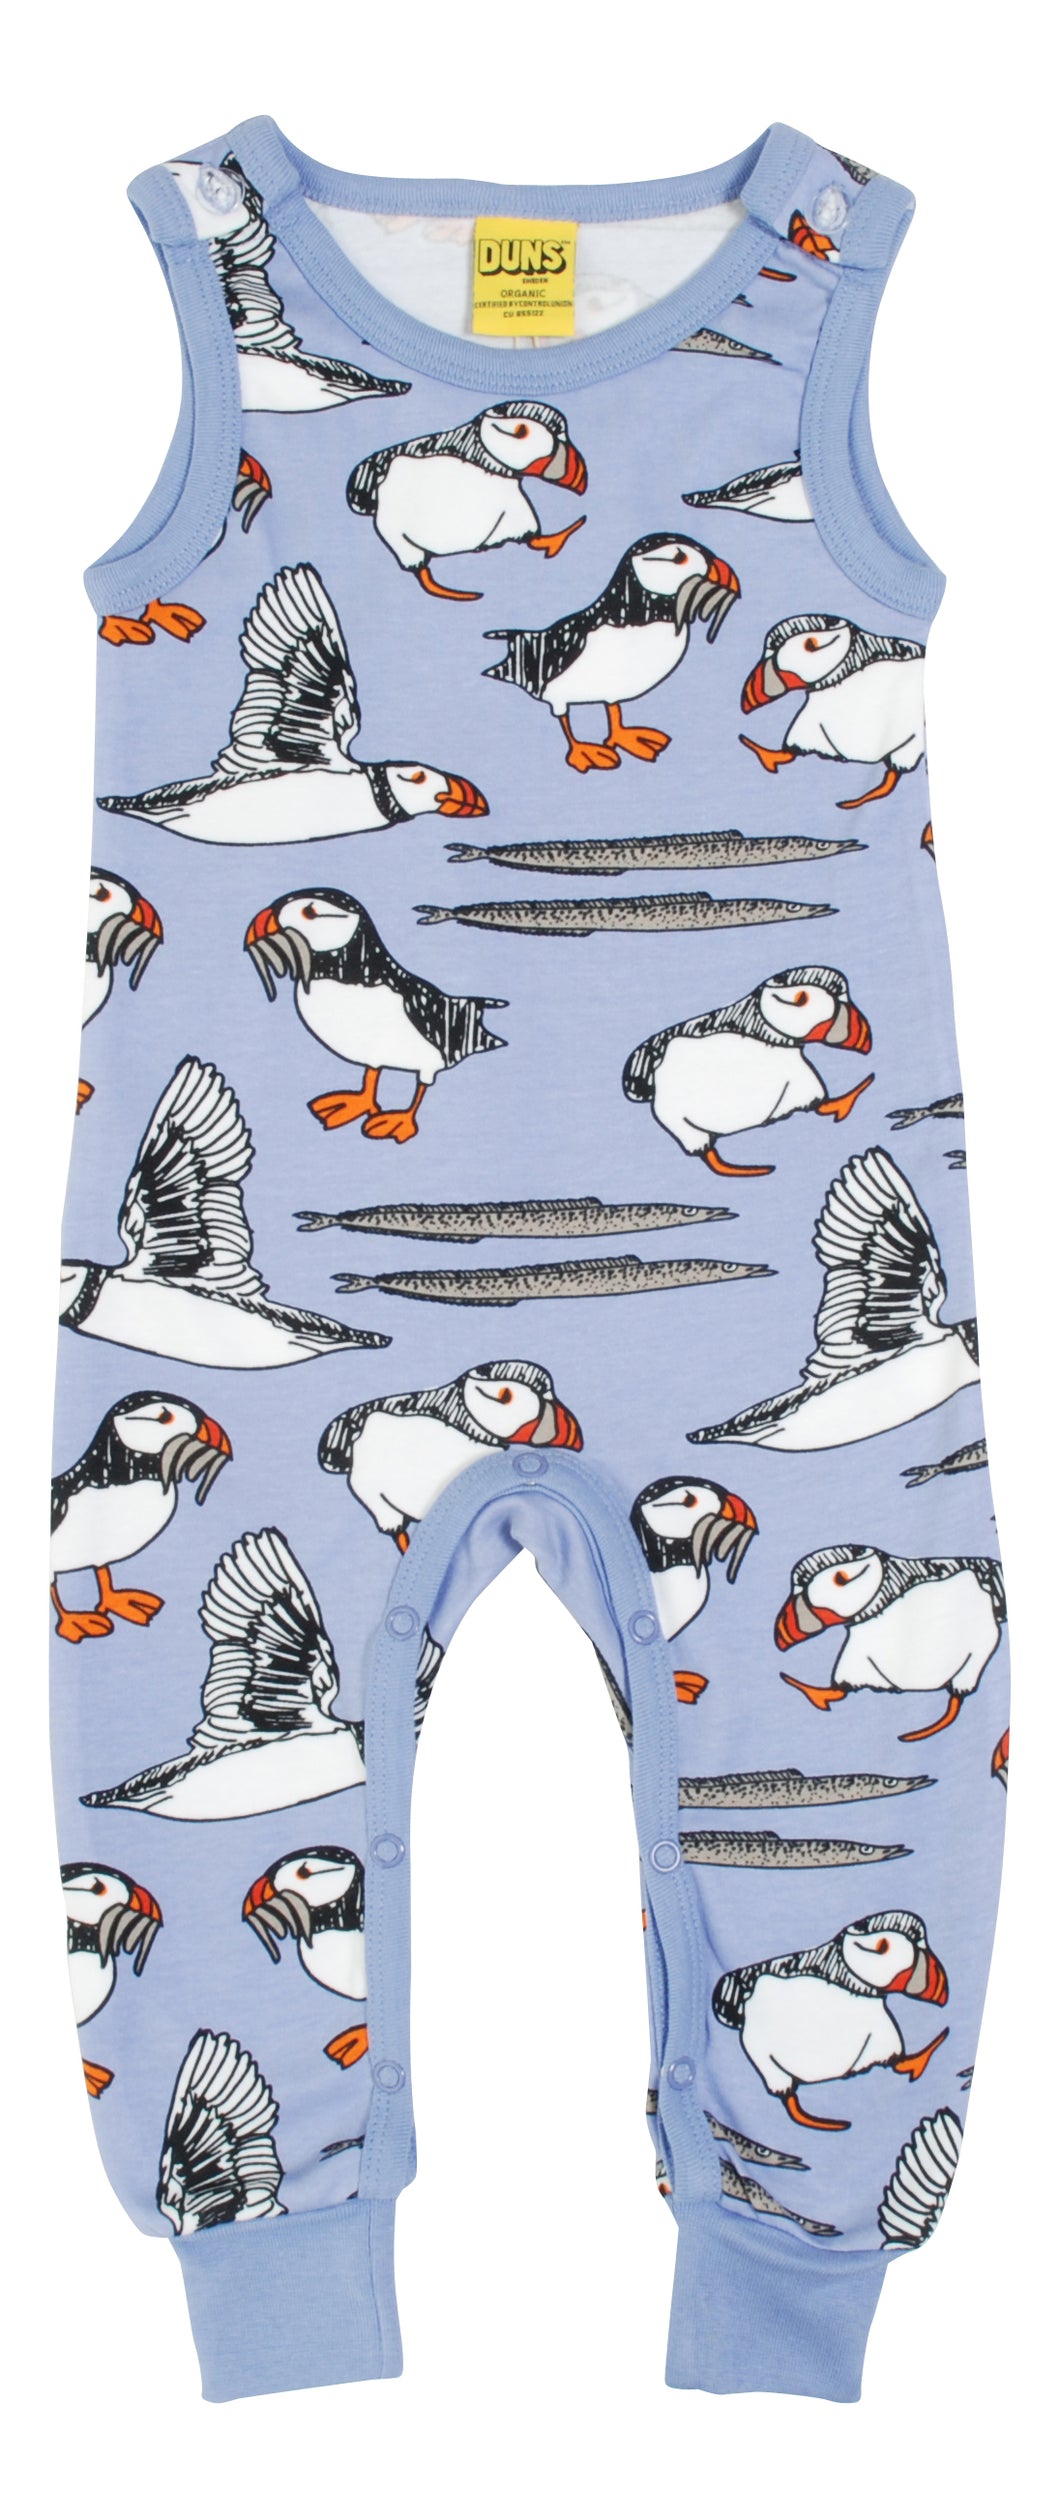 Duns Easter Egg Puffin Dungarees